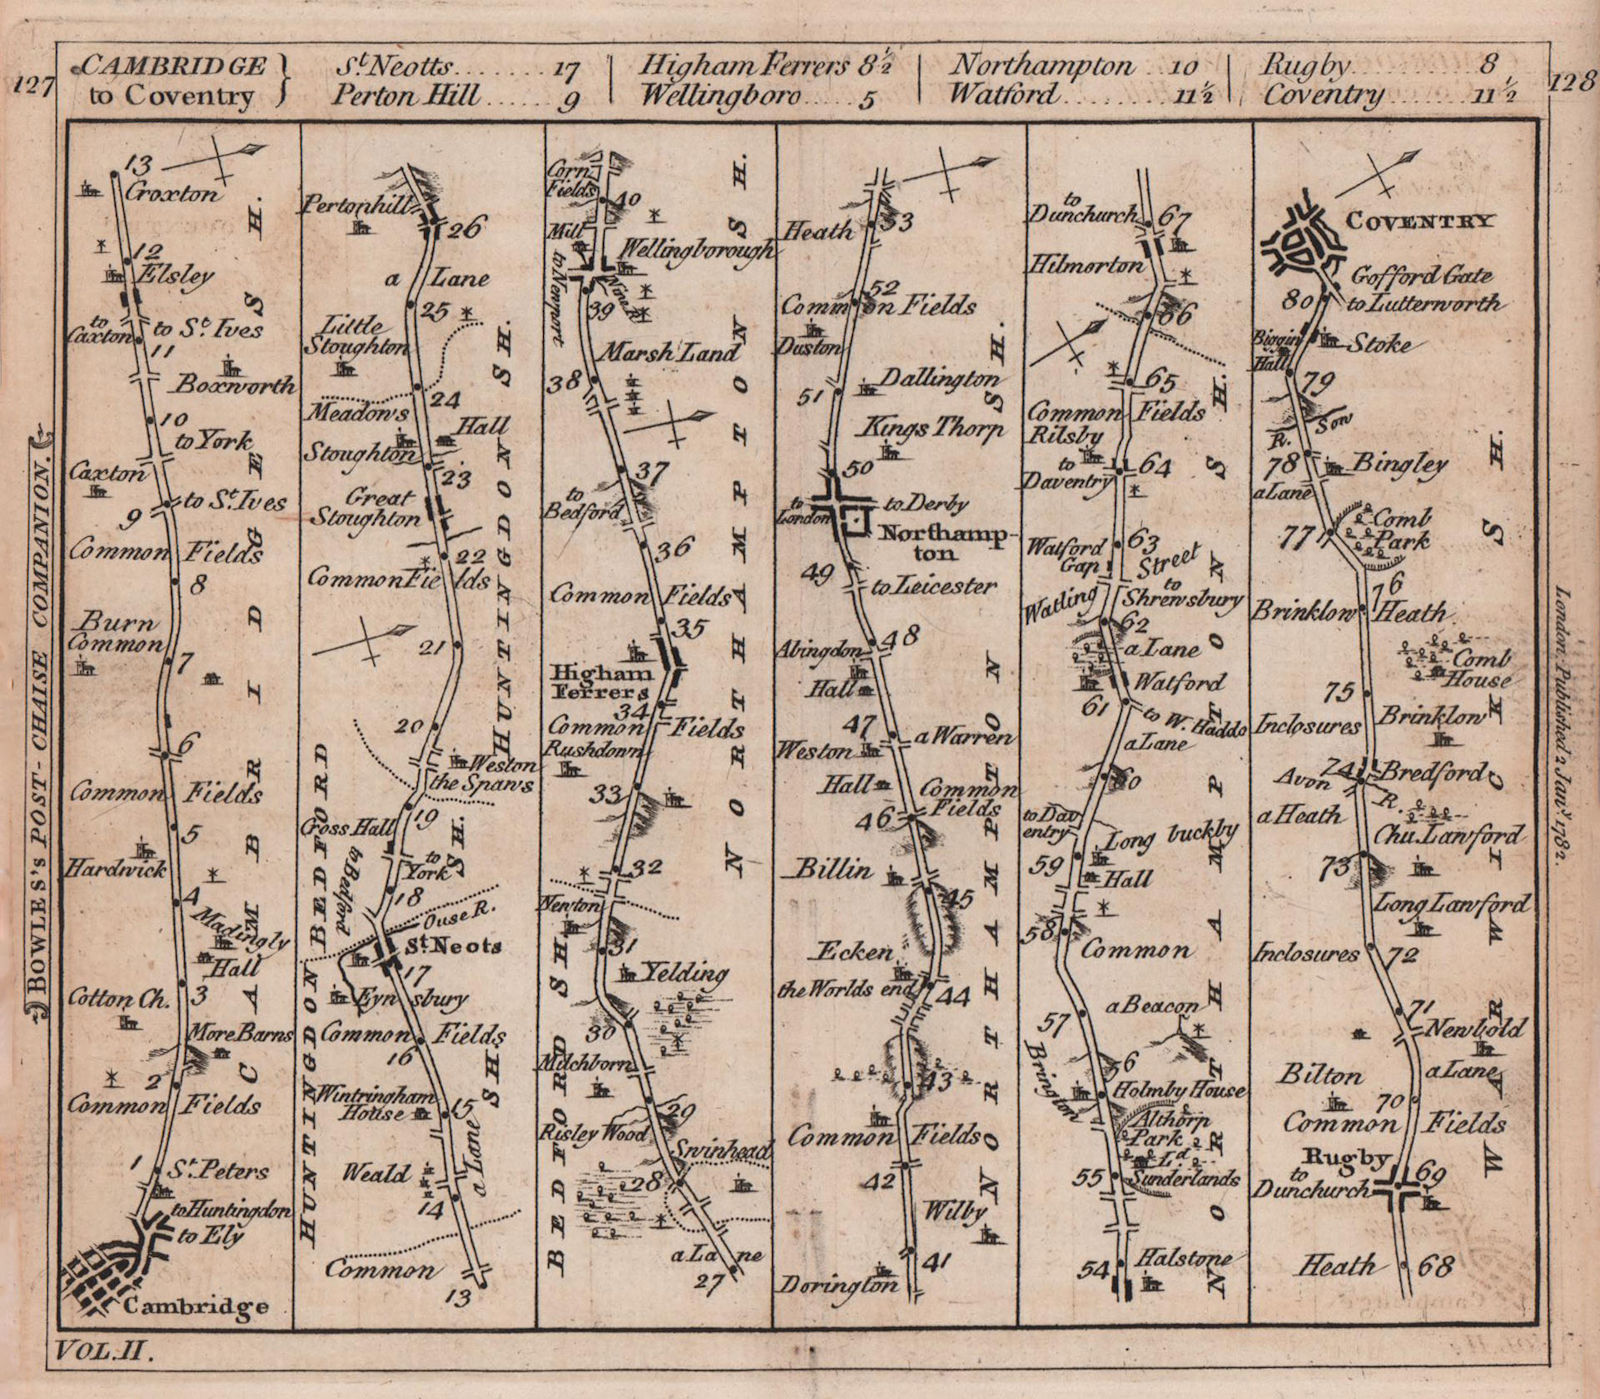 Cambridge-St. Neots-Northampton-Rugby-Coventry road strip map. BOWLES 1782